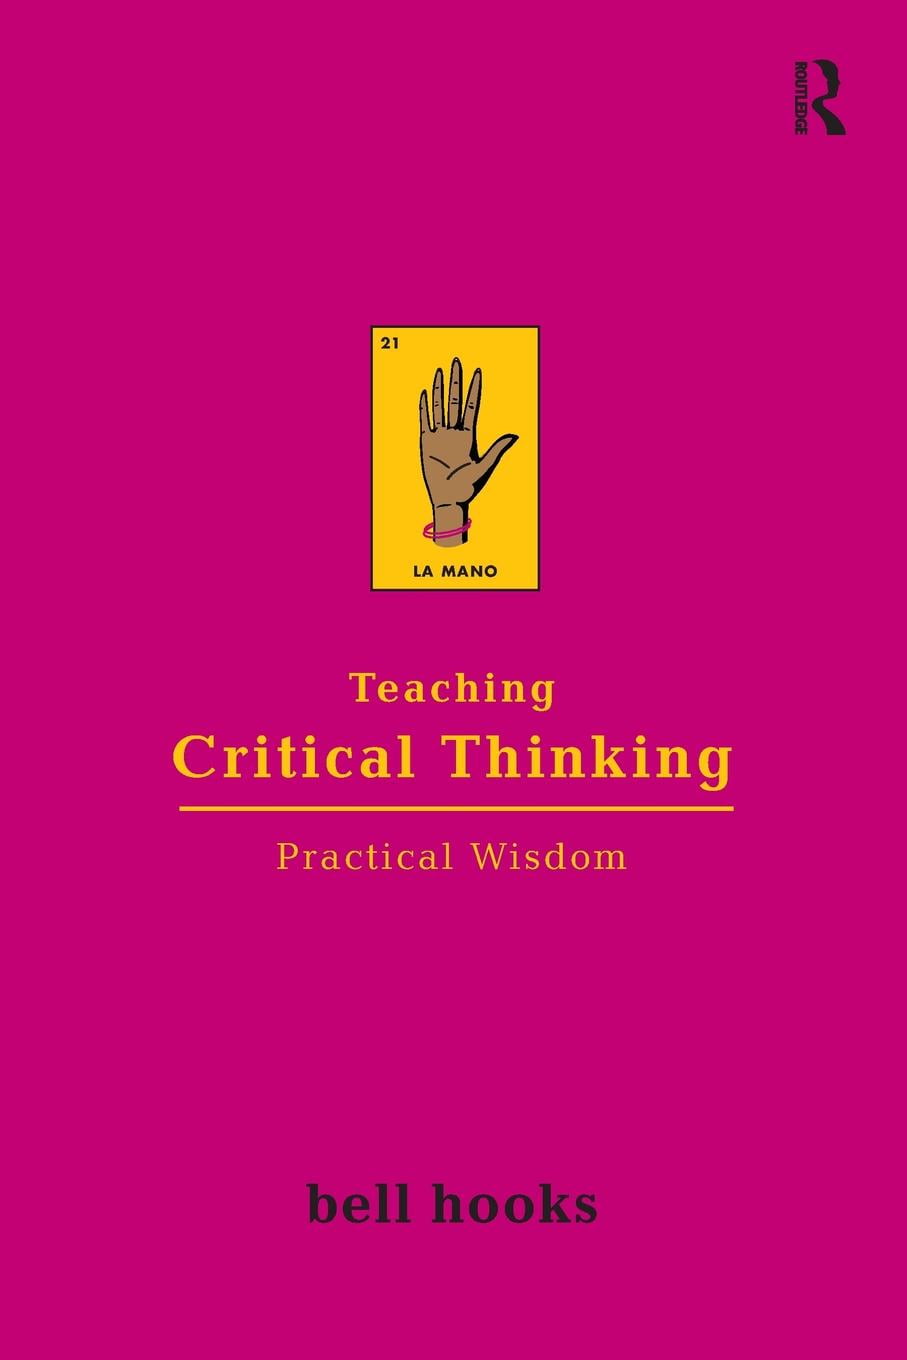 bell hooks critical thinking book